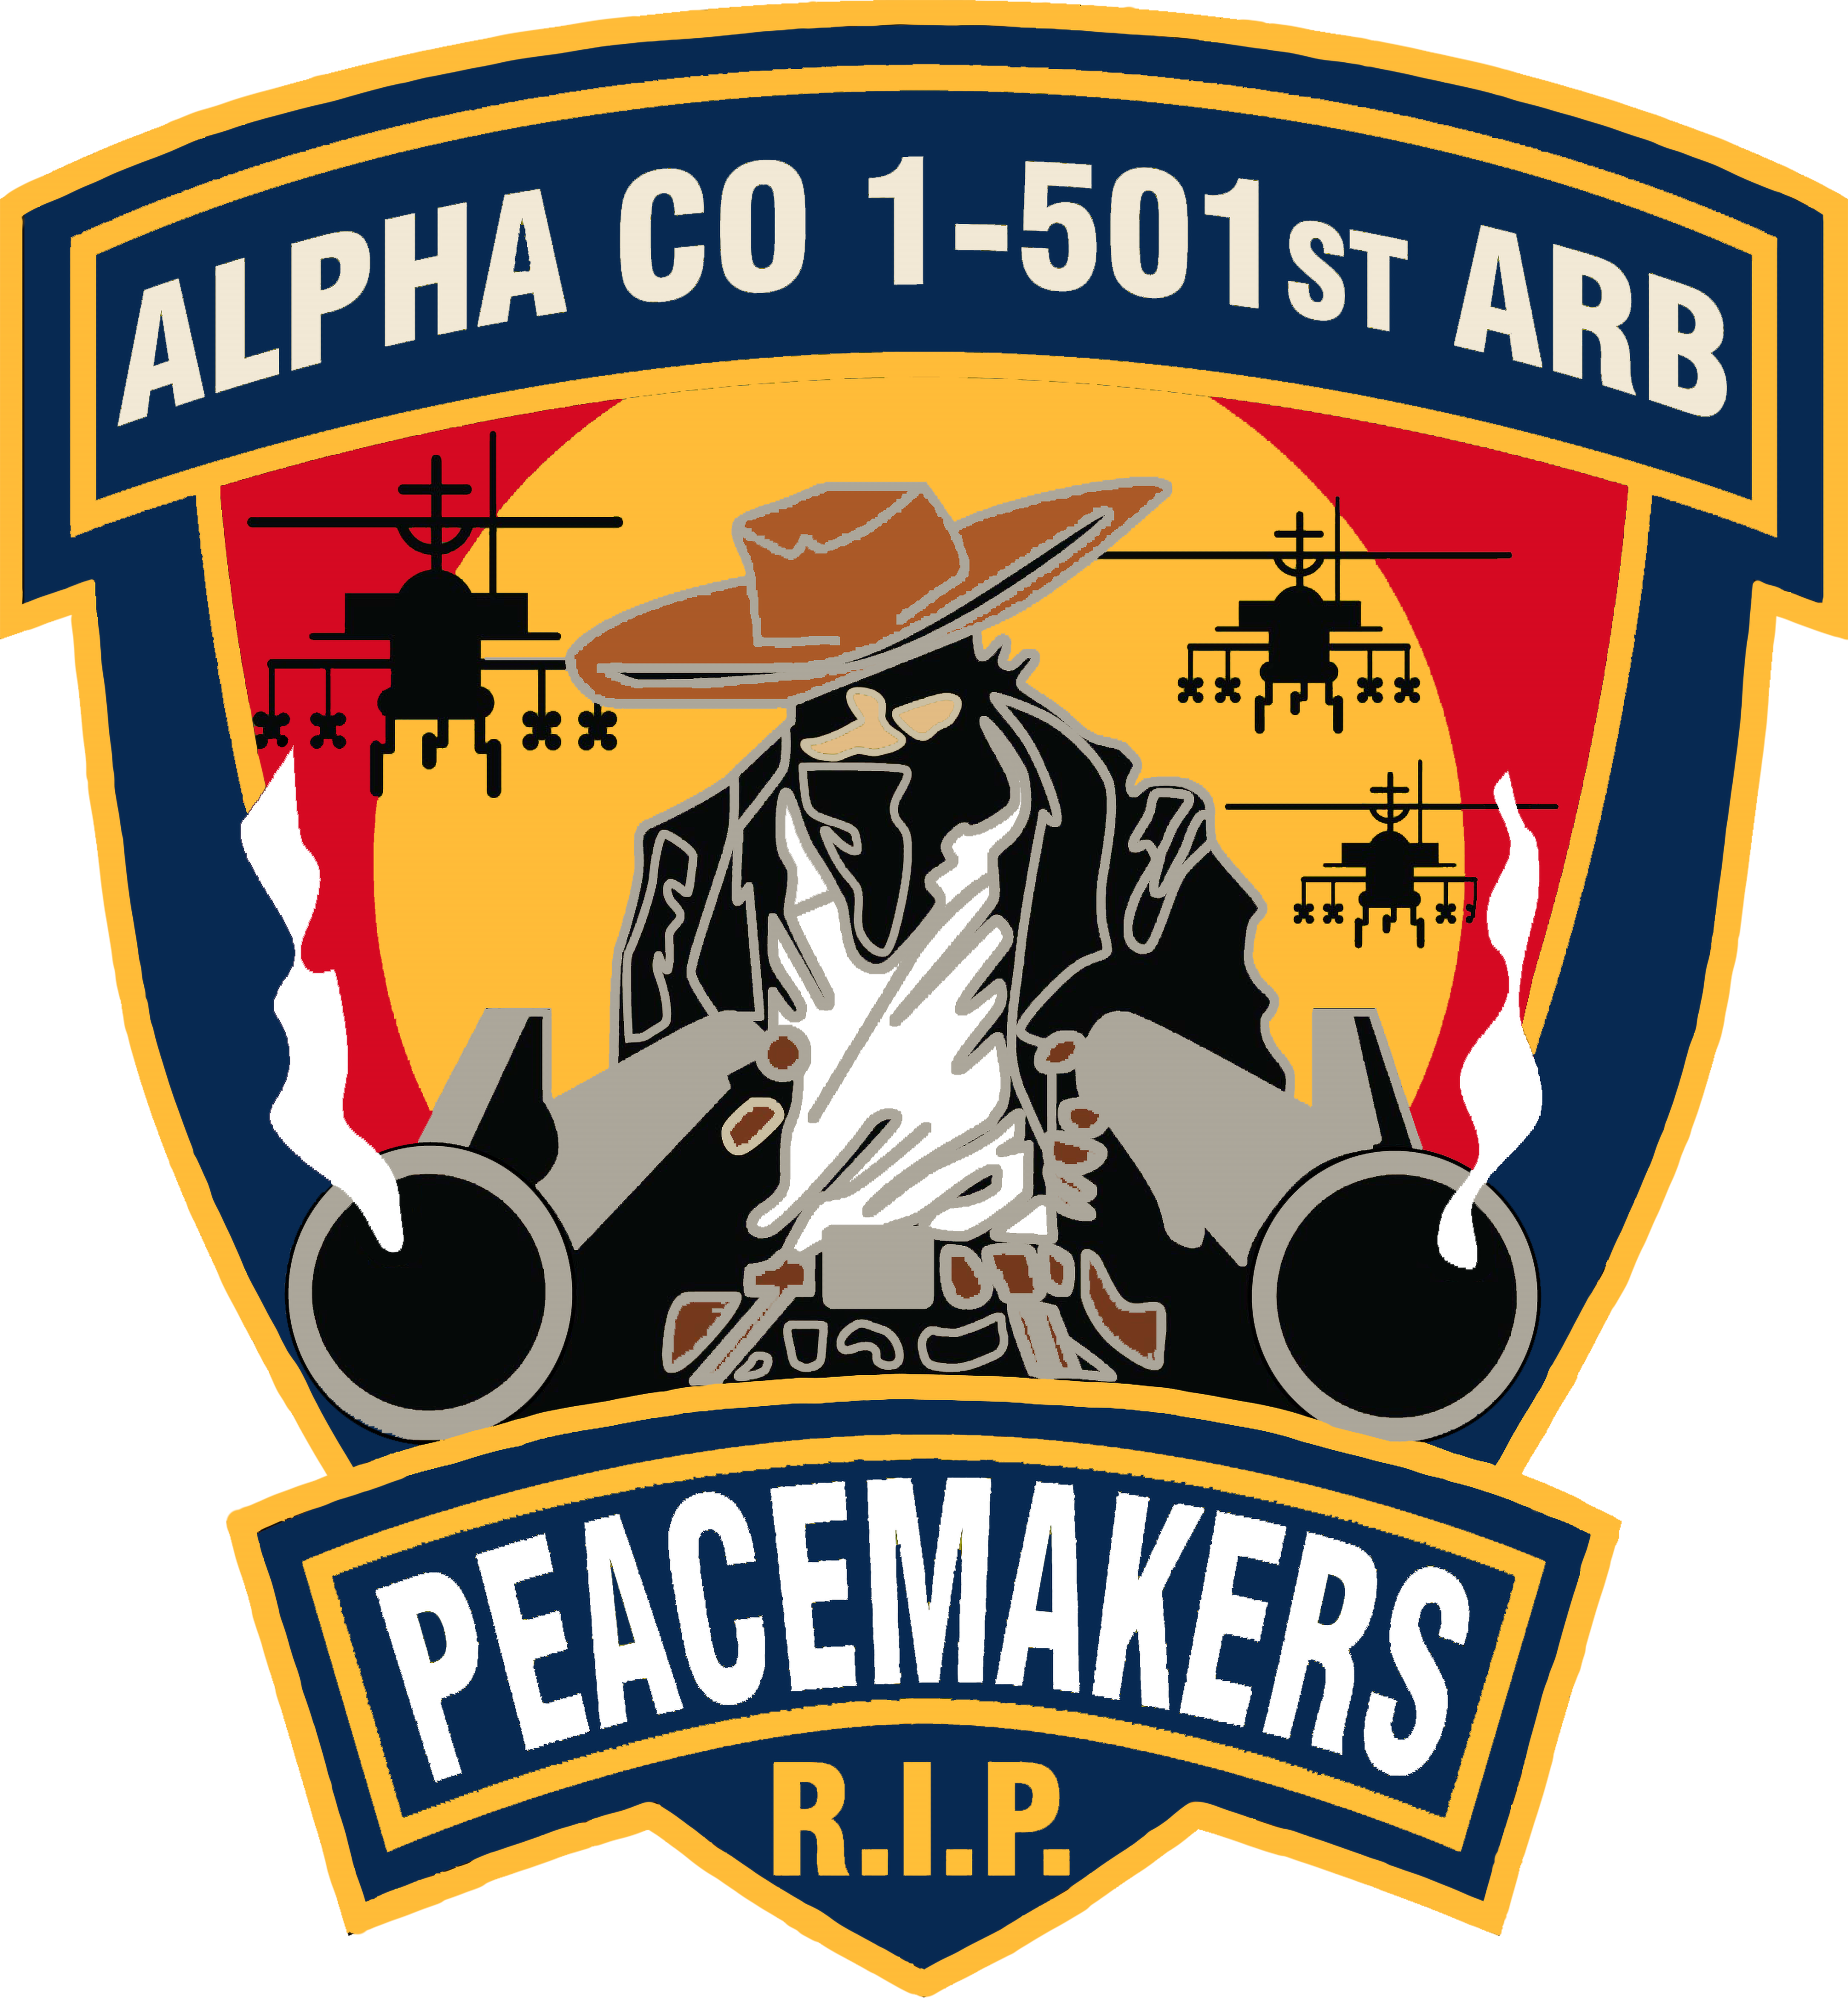 A Co, 1-501 ARB "Peacemakers"